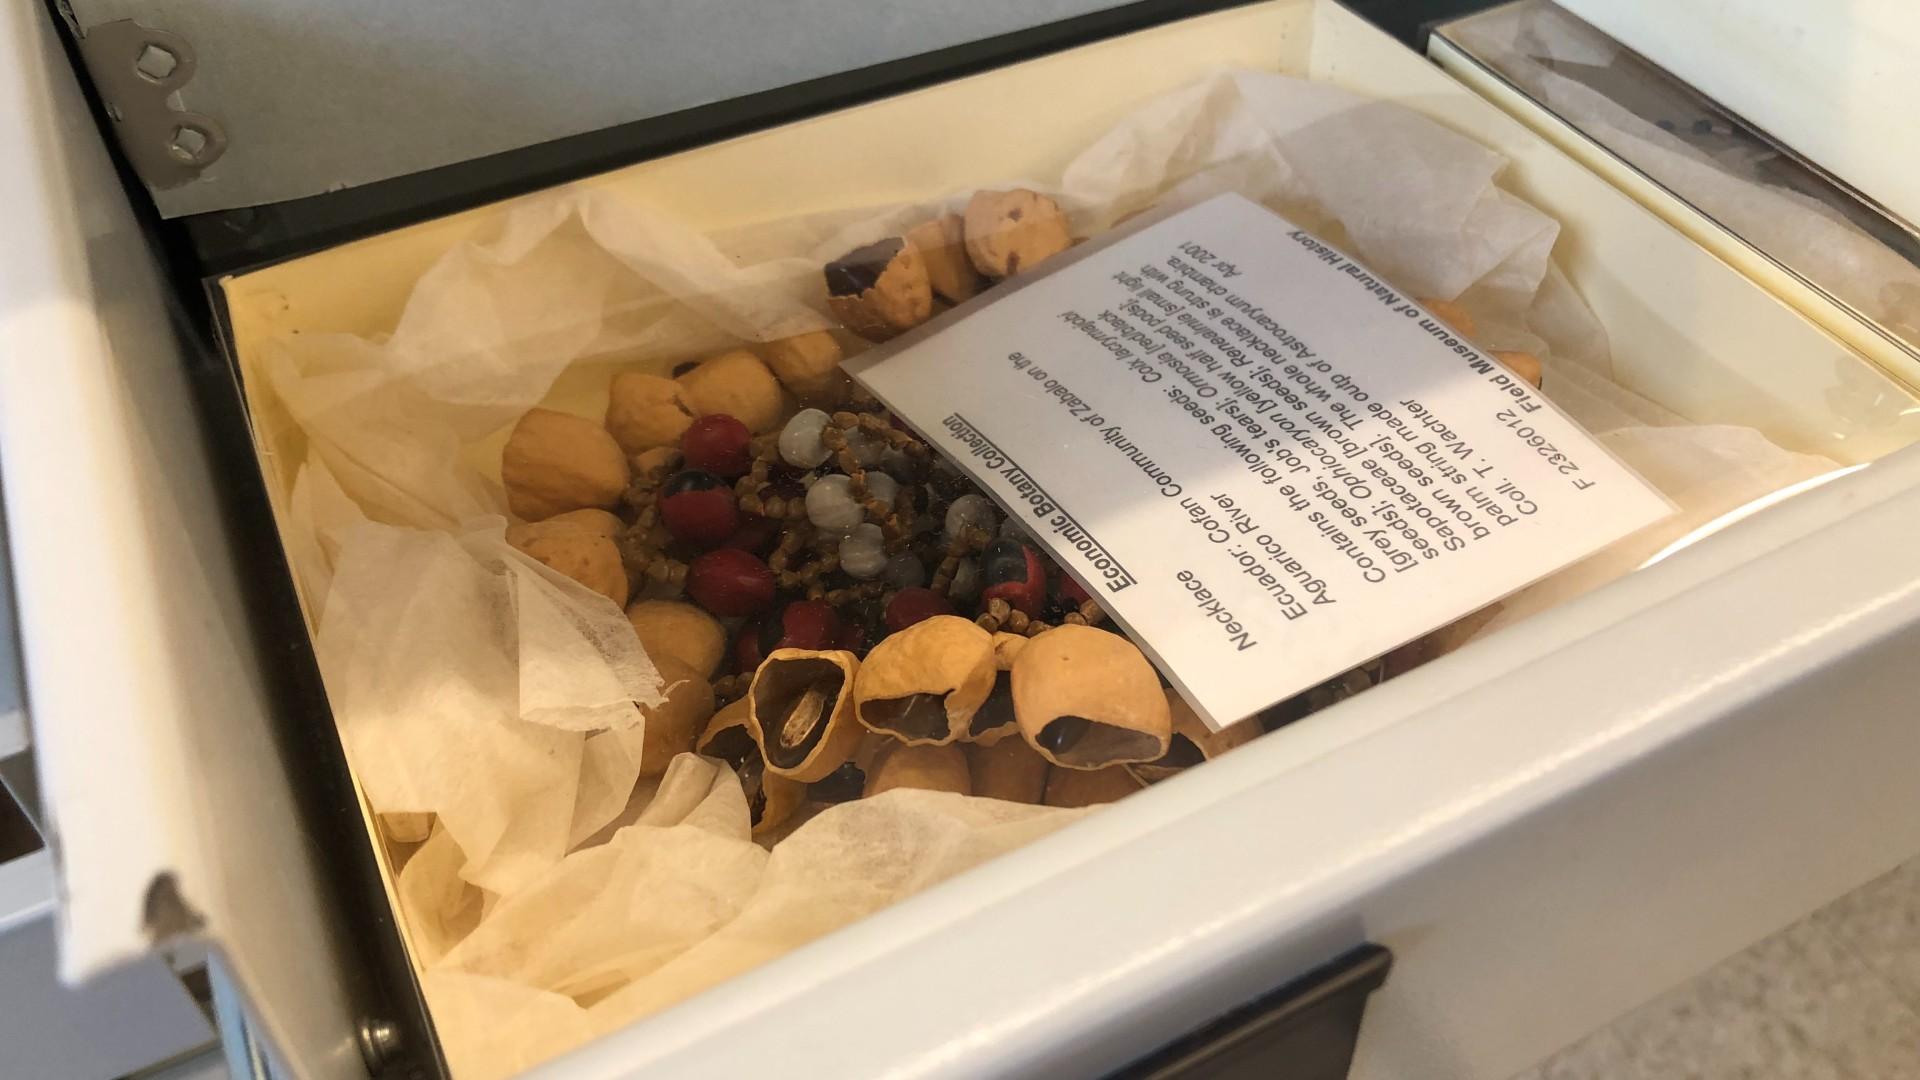 The Field Museum’s Economic Botany collection consists of objects that demonstrate the role plants play in the economy, like this necklace made from seeds. (Patty Wetli / WTTW News)